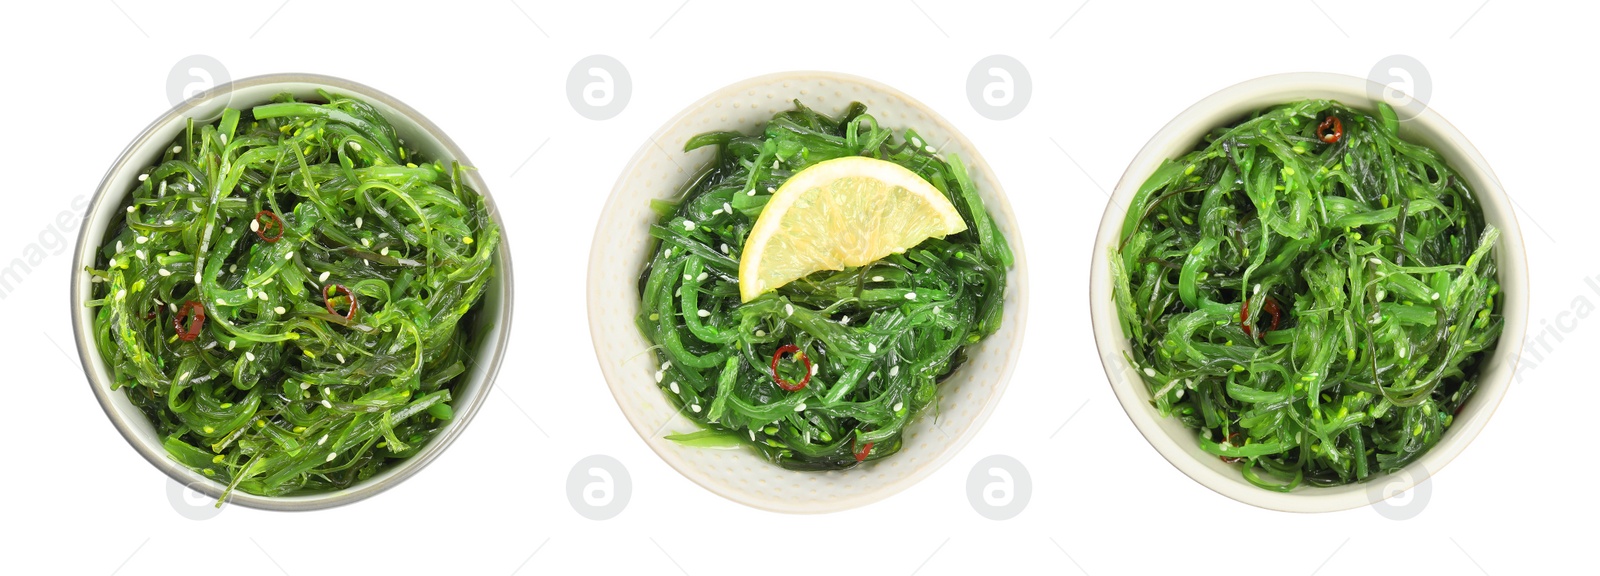 Image of Japanese seaweed salad in bowls on white background, top view. Collage